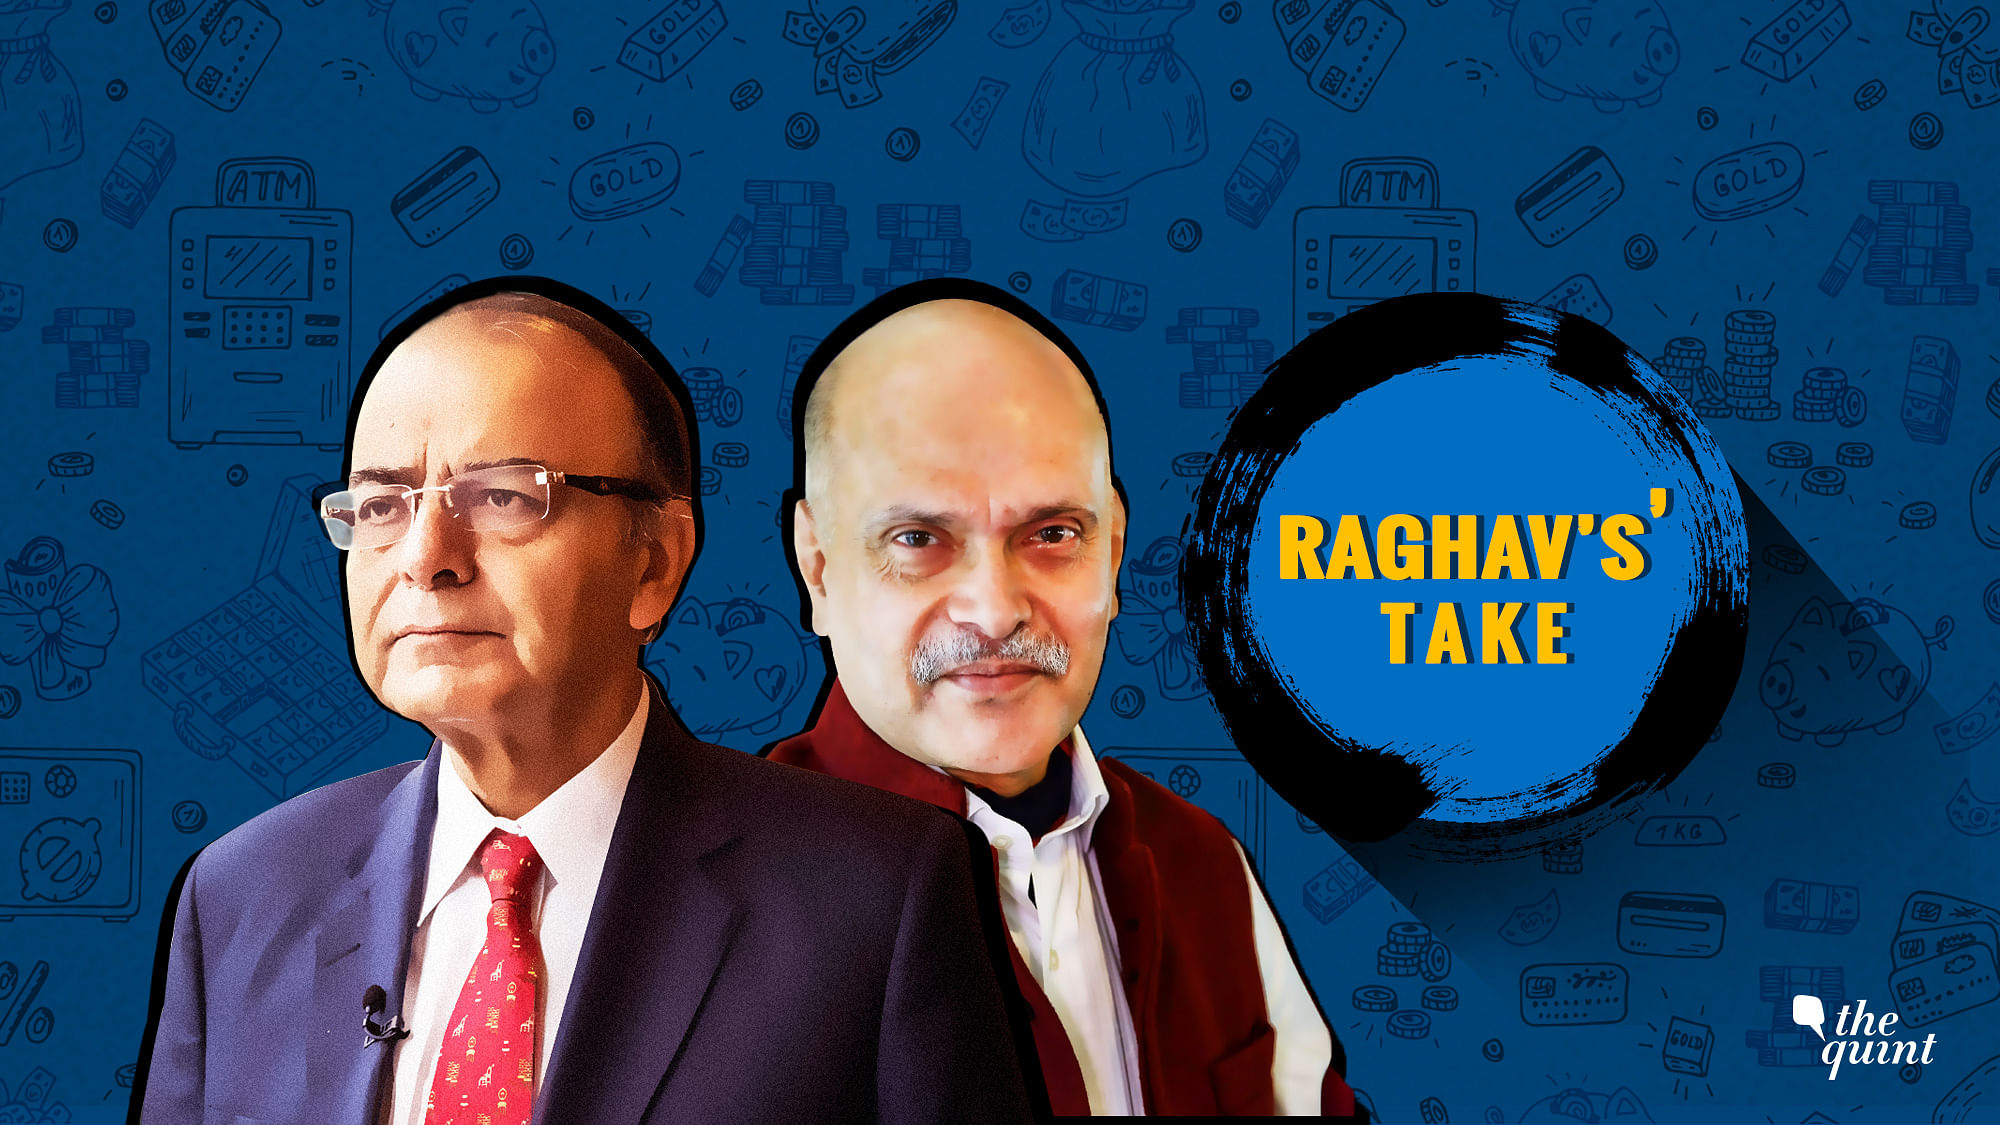  Images of Finance Minister Arun Jaitley (L) and The Quint’s Founder-Editor Raghav Bahl (R), used for representational purposes.